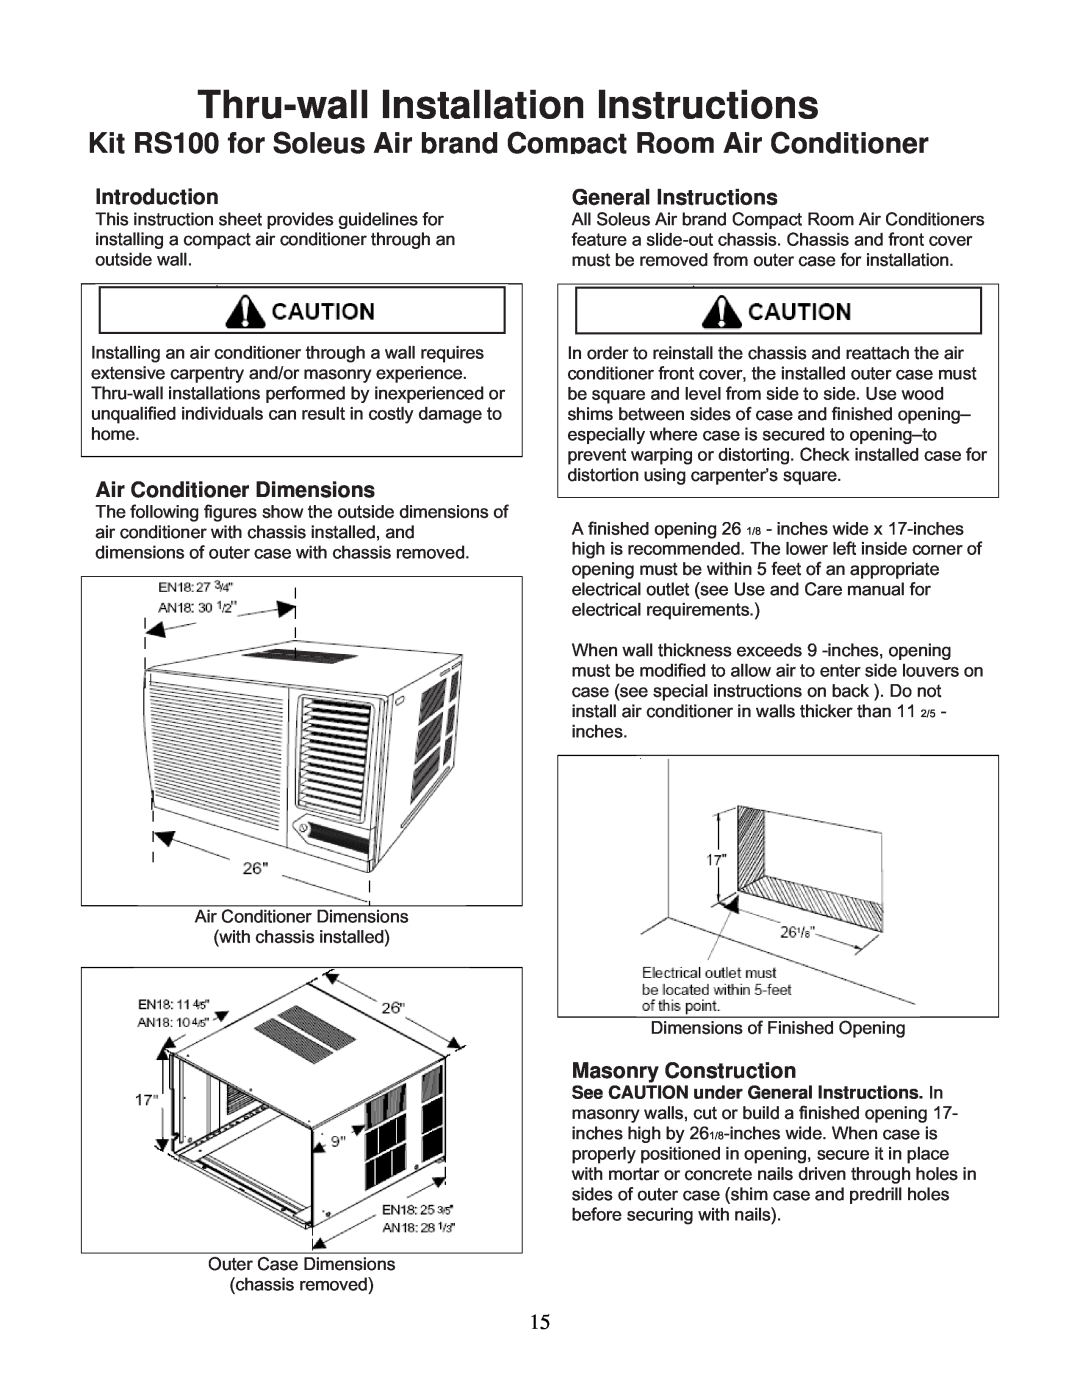 Soleus Air KC-45H Thru-wallInstallation Instructions, Introduction, Air Conditioner Dimensions, General Instructions 